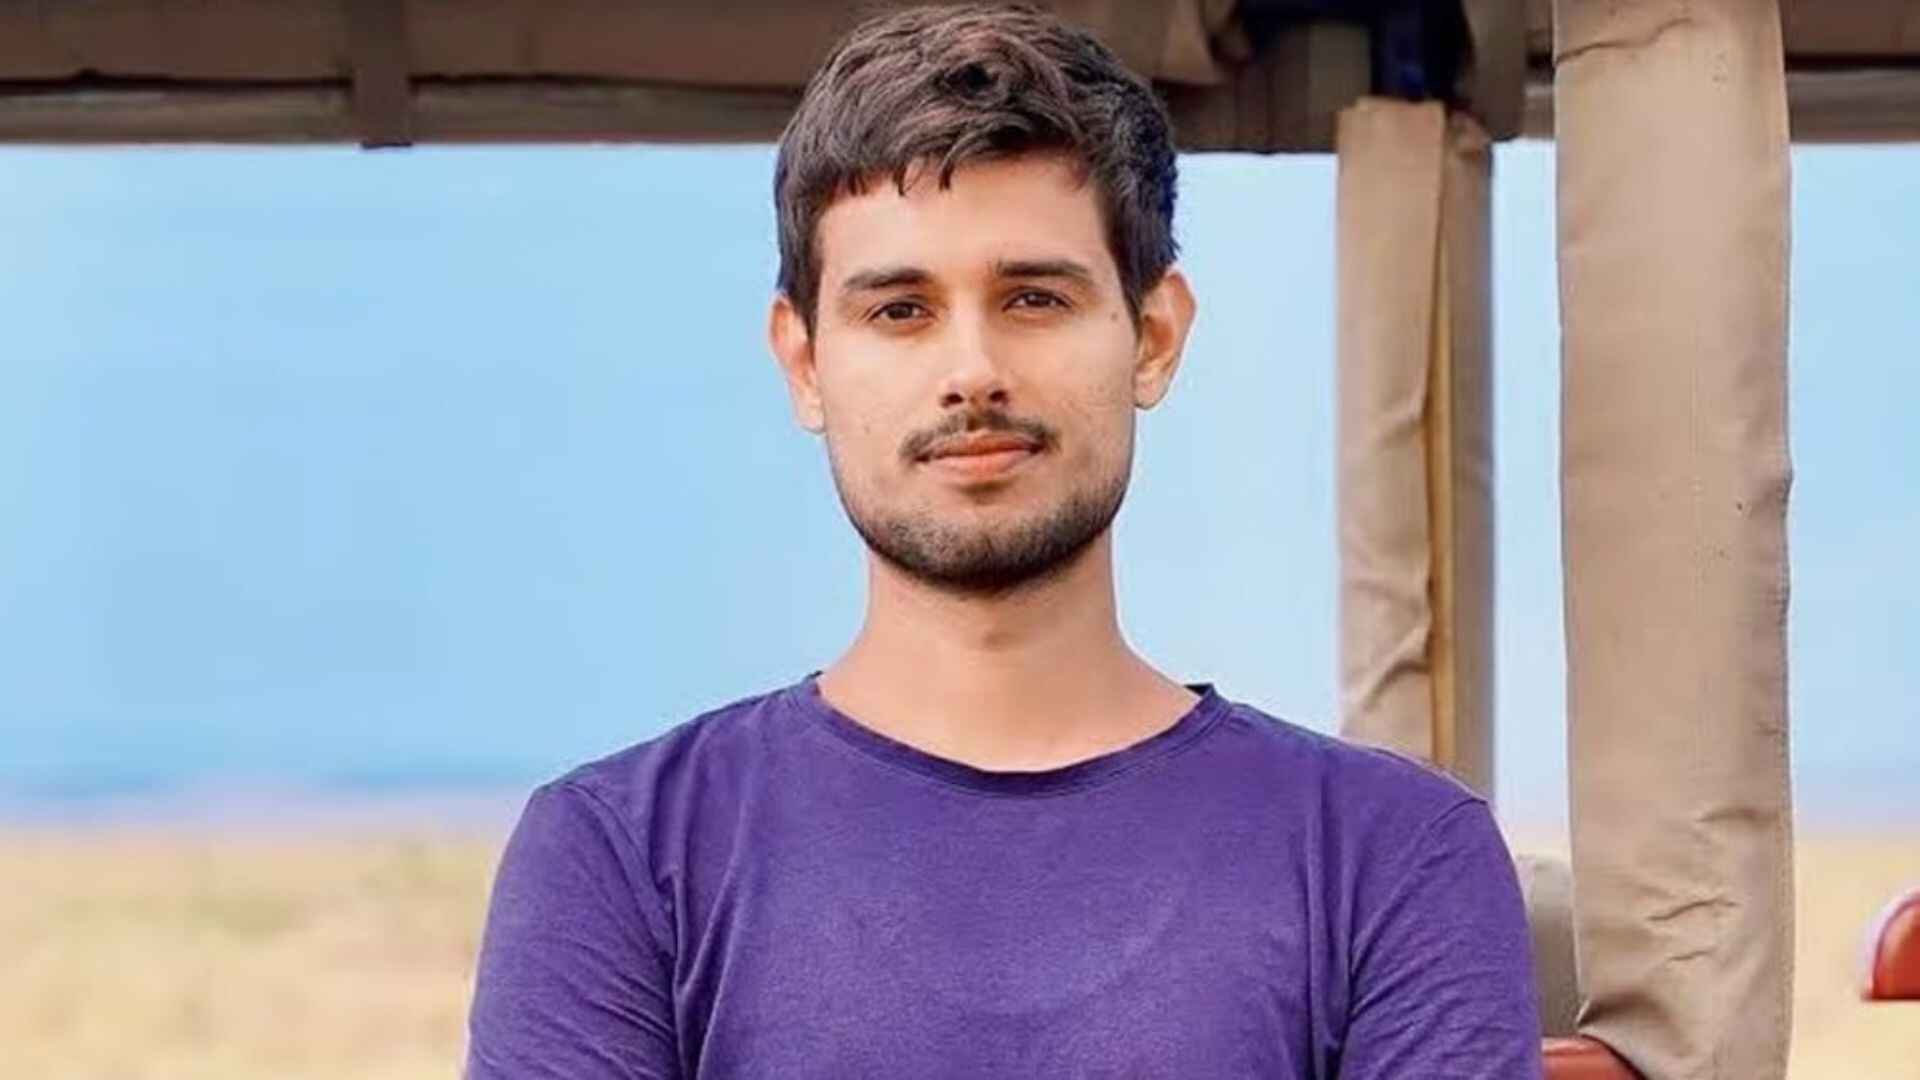 Maharashtra’s Cyber Police Files Case Against YouTuber Dhruv Rathee In Response To A Post From A Parody Account